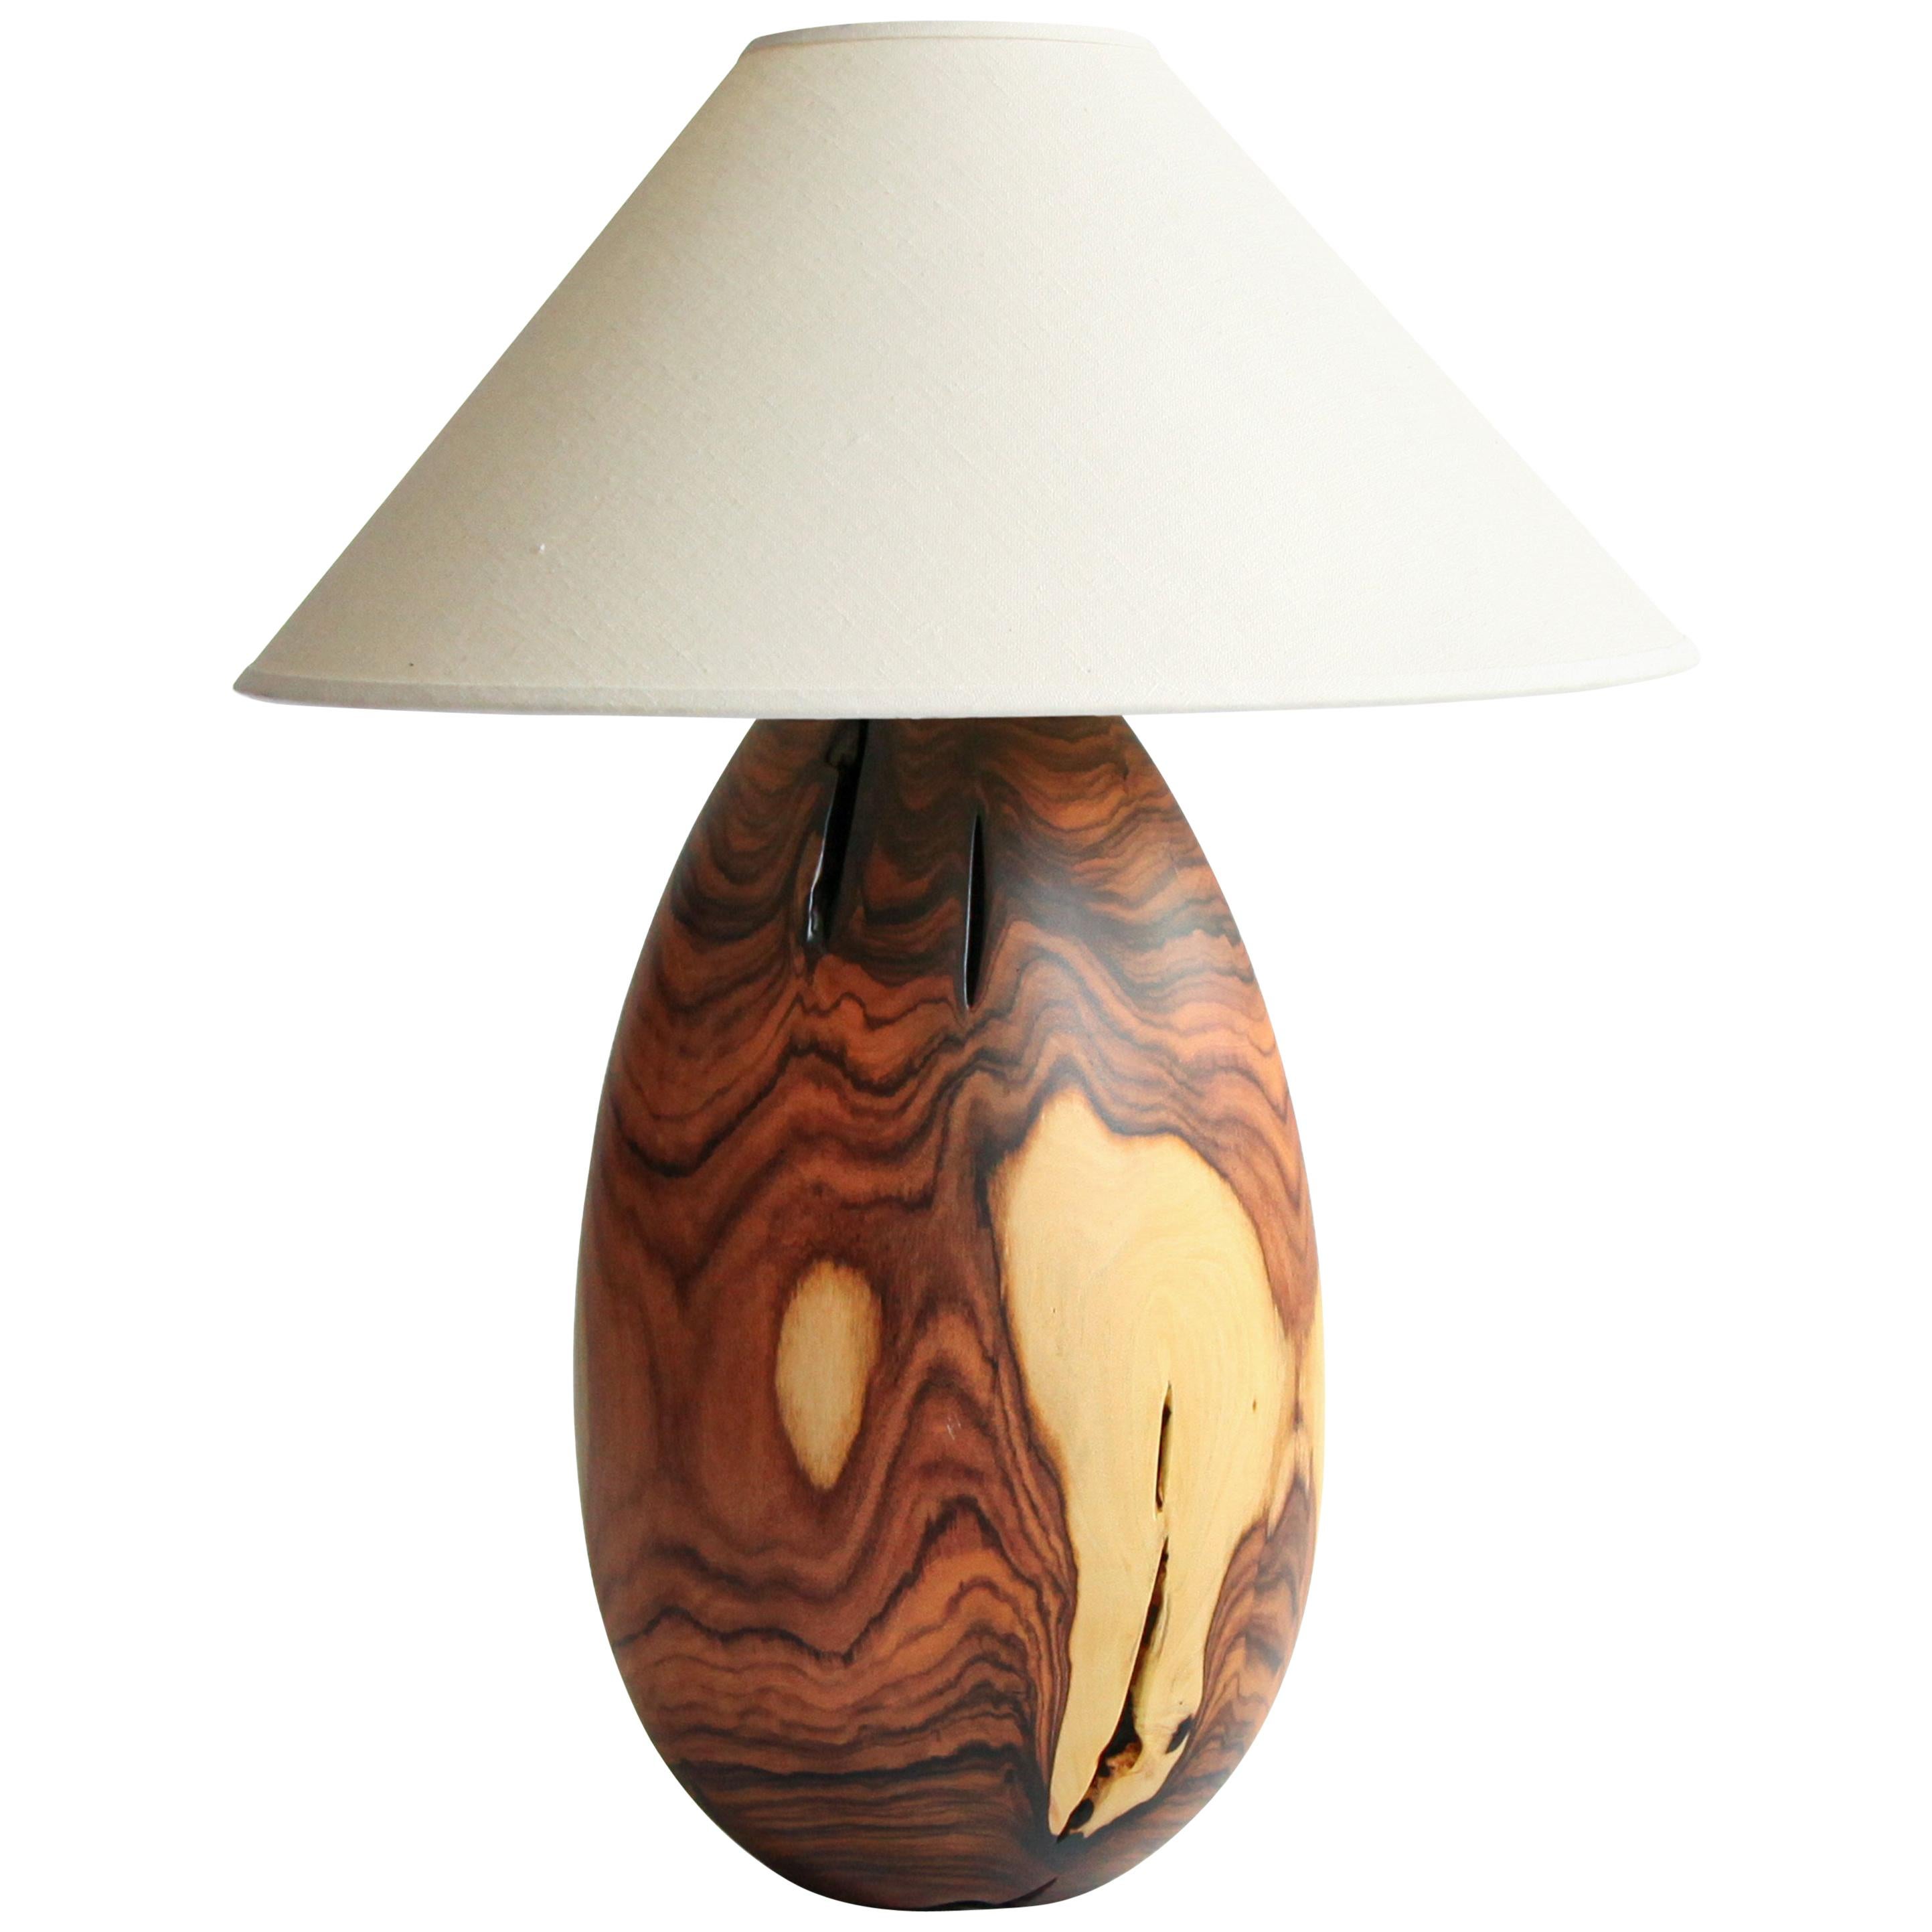 Bolivian Rosewood Lamp with White Linen Shade, Large, Árbol Collection, 8